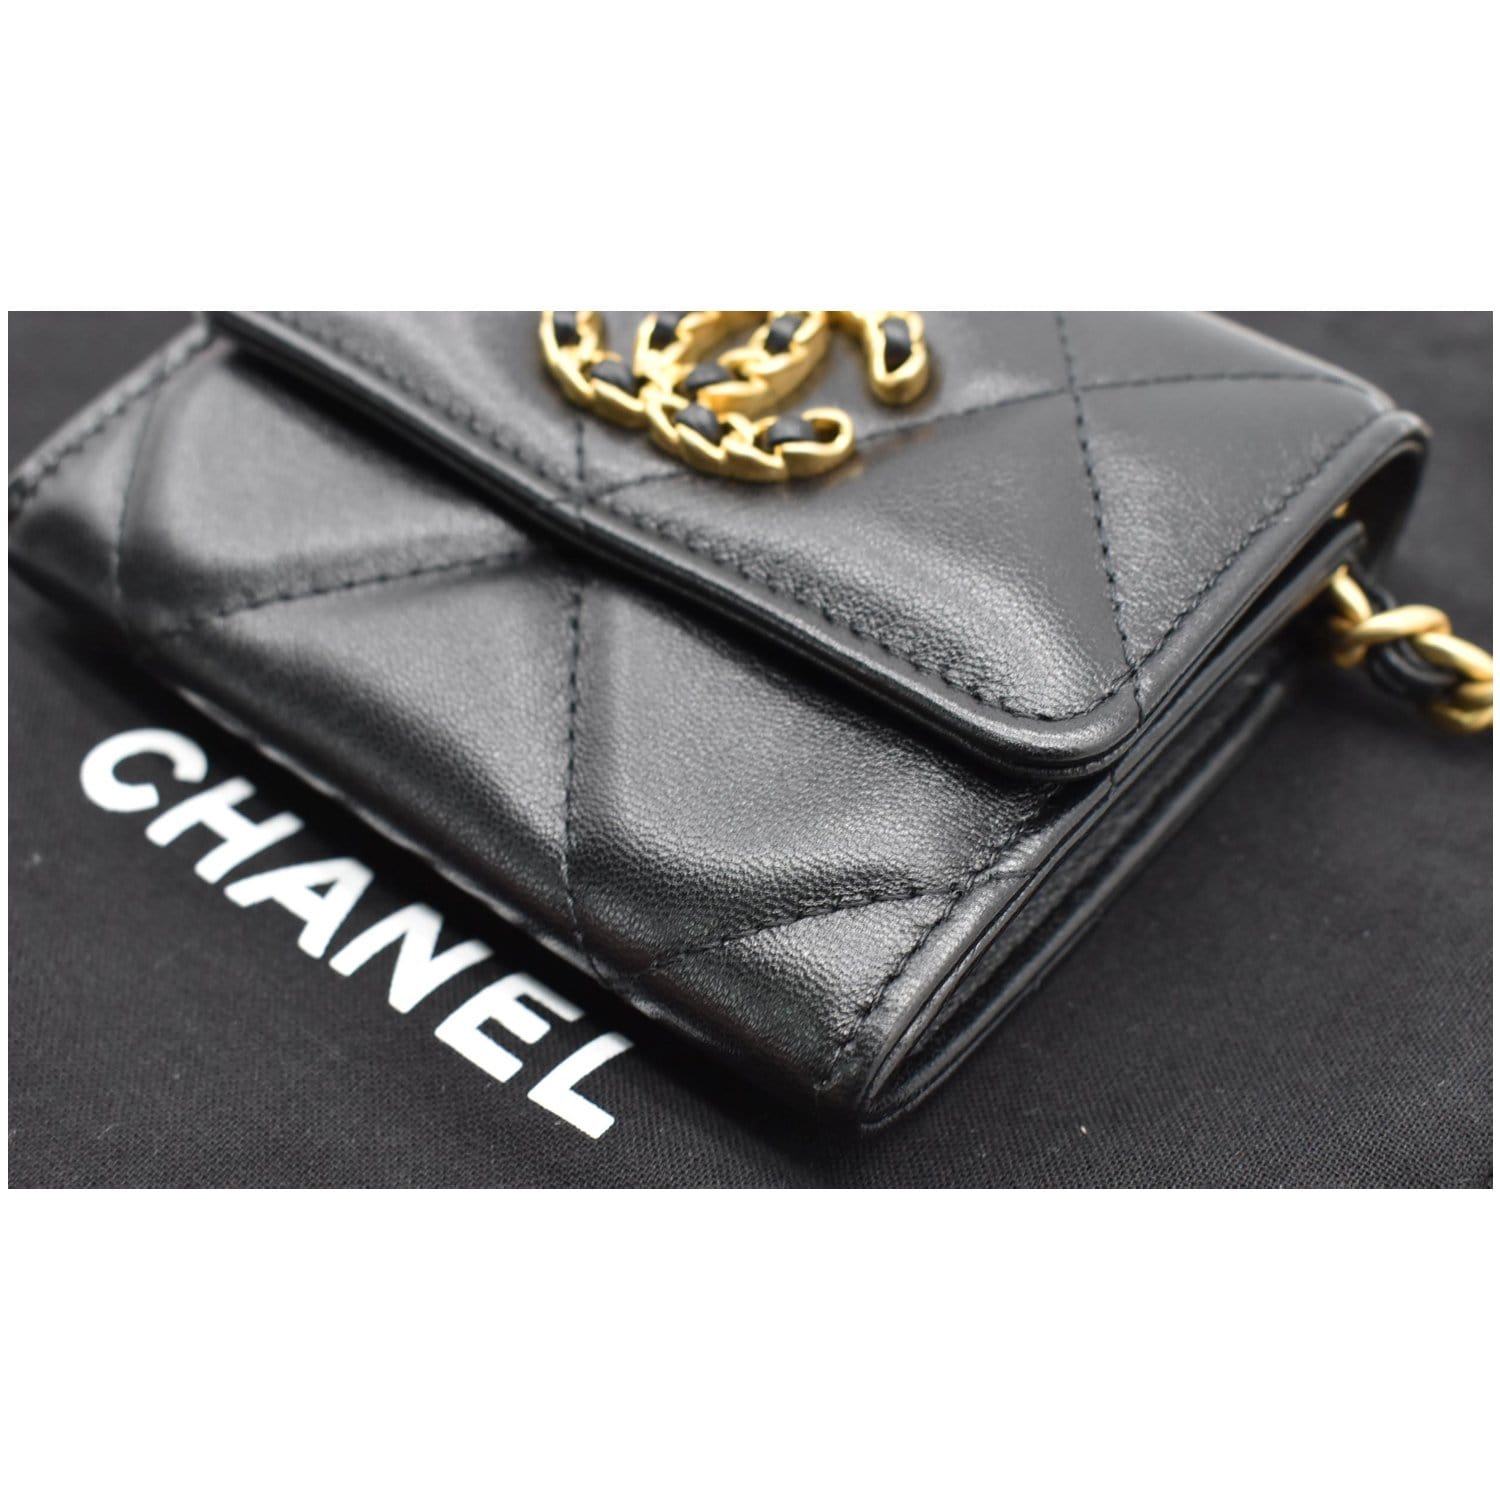 chanel coin purse with chain